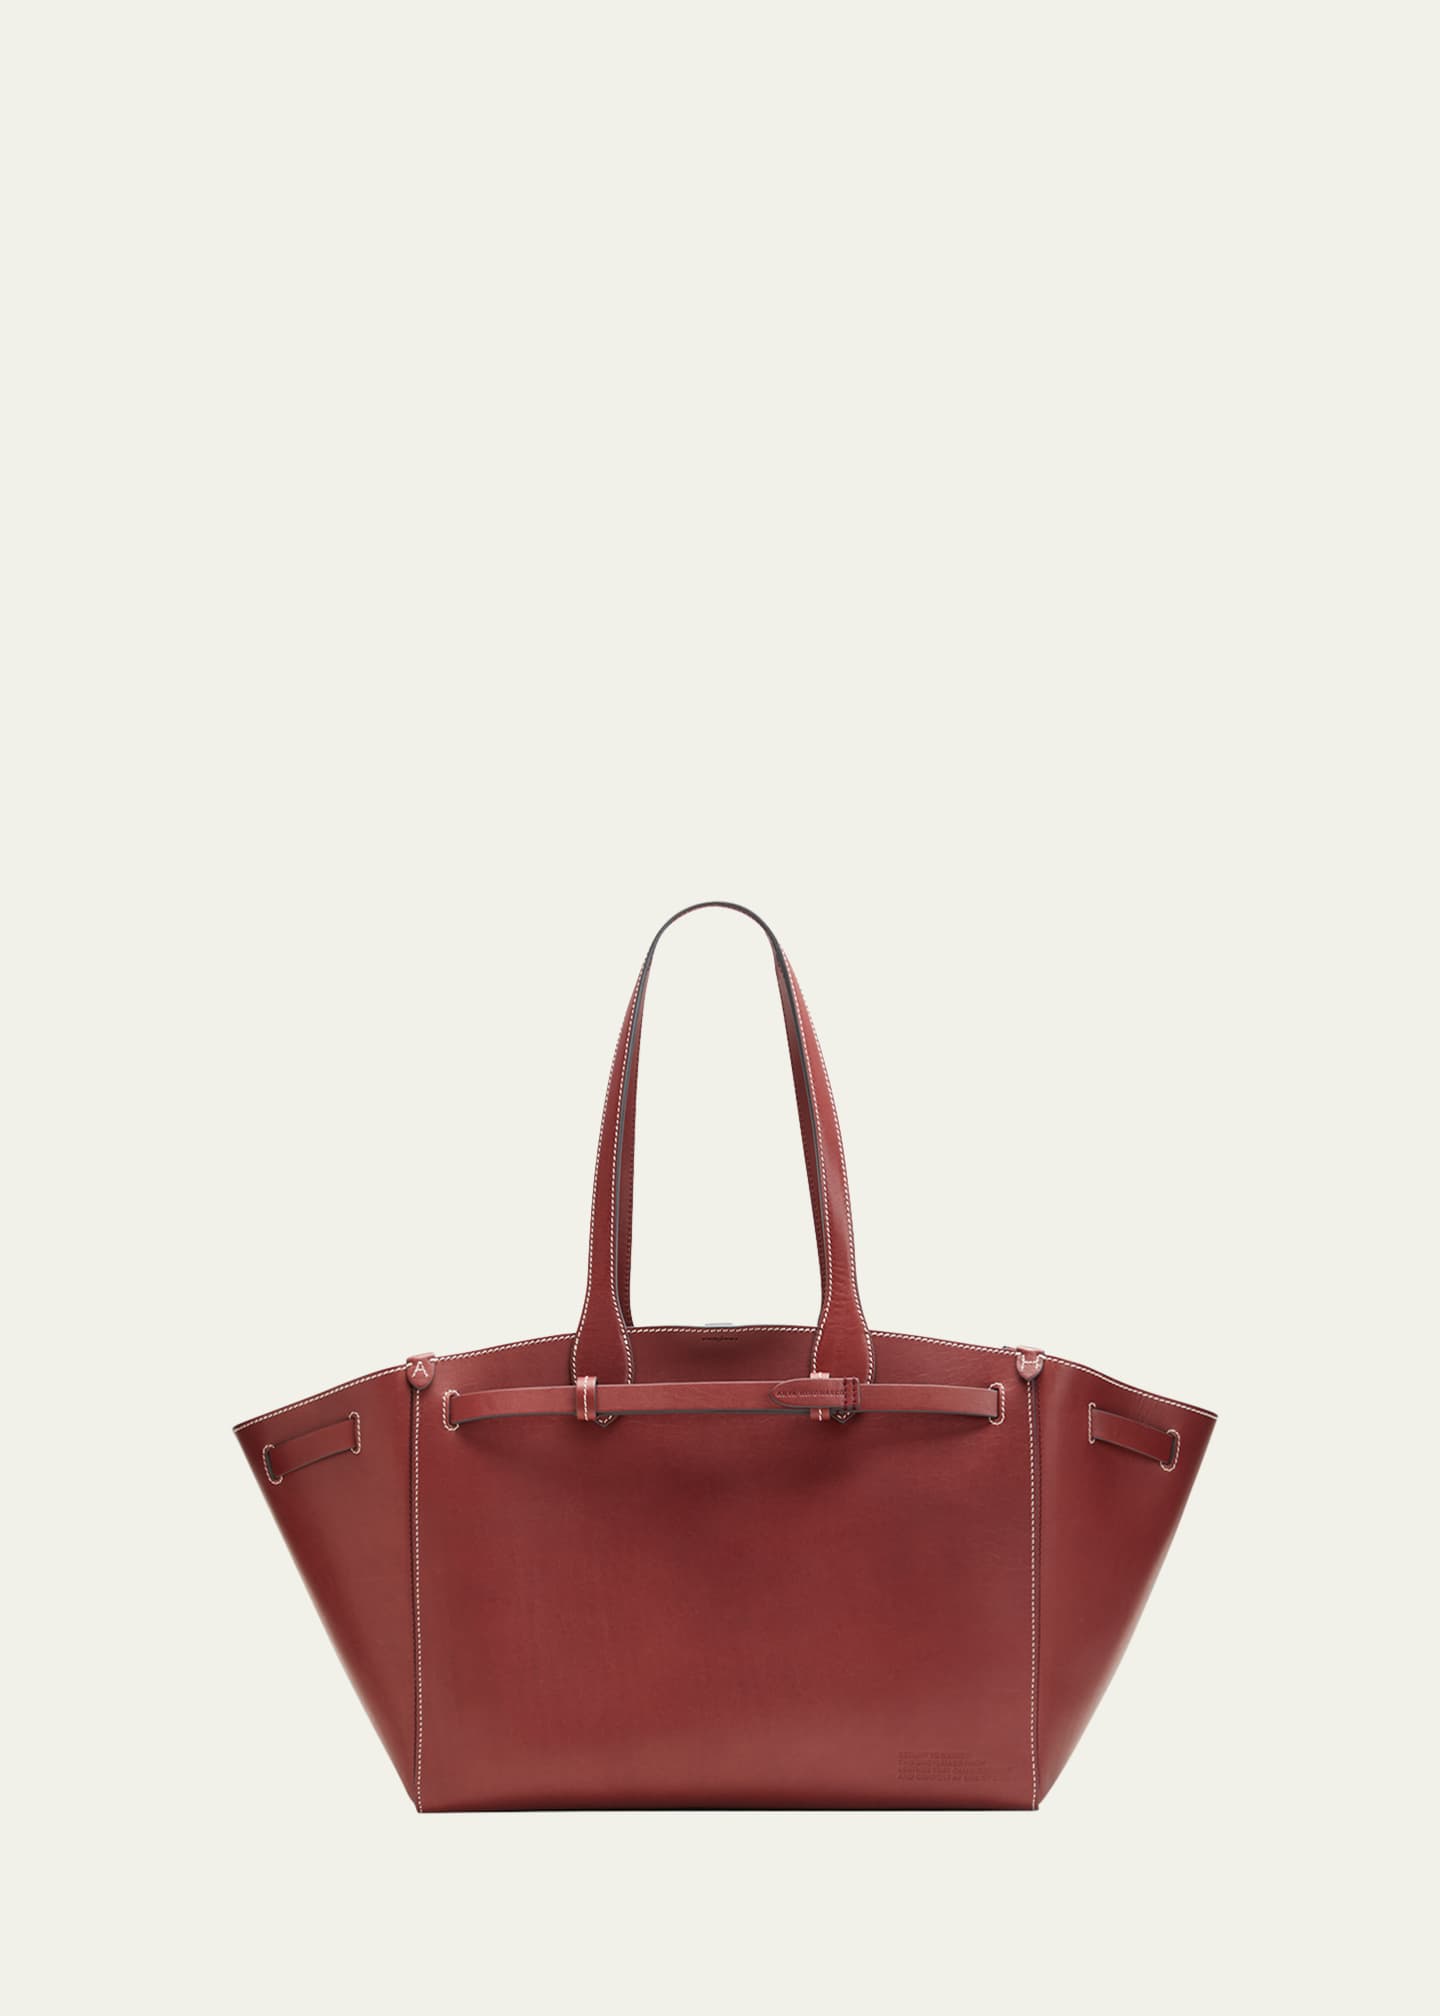 Anya Hindmarch Return to Nature Leather Tote Bag